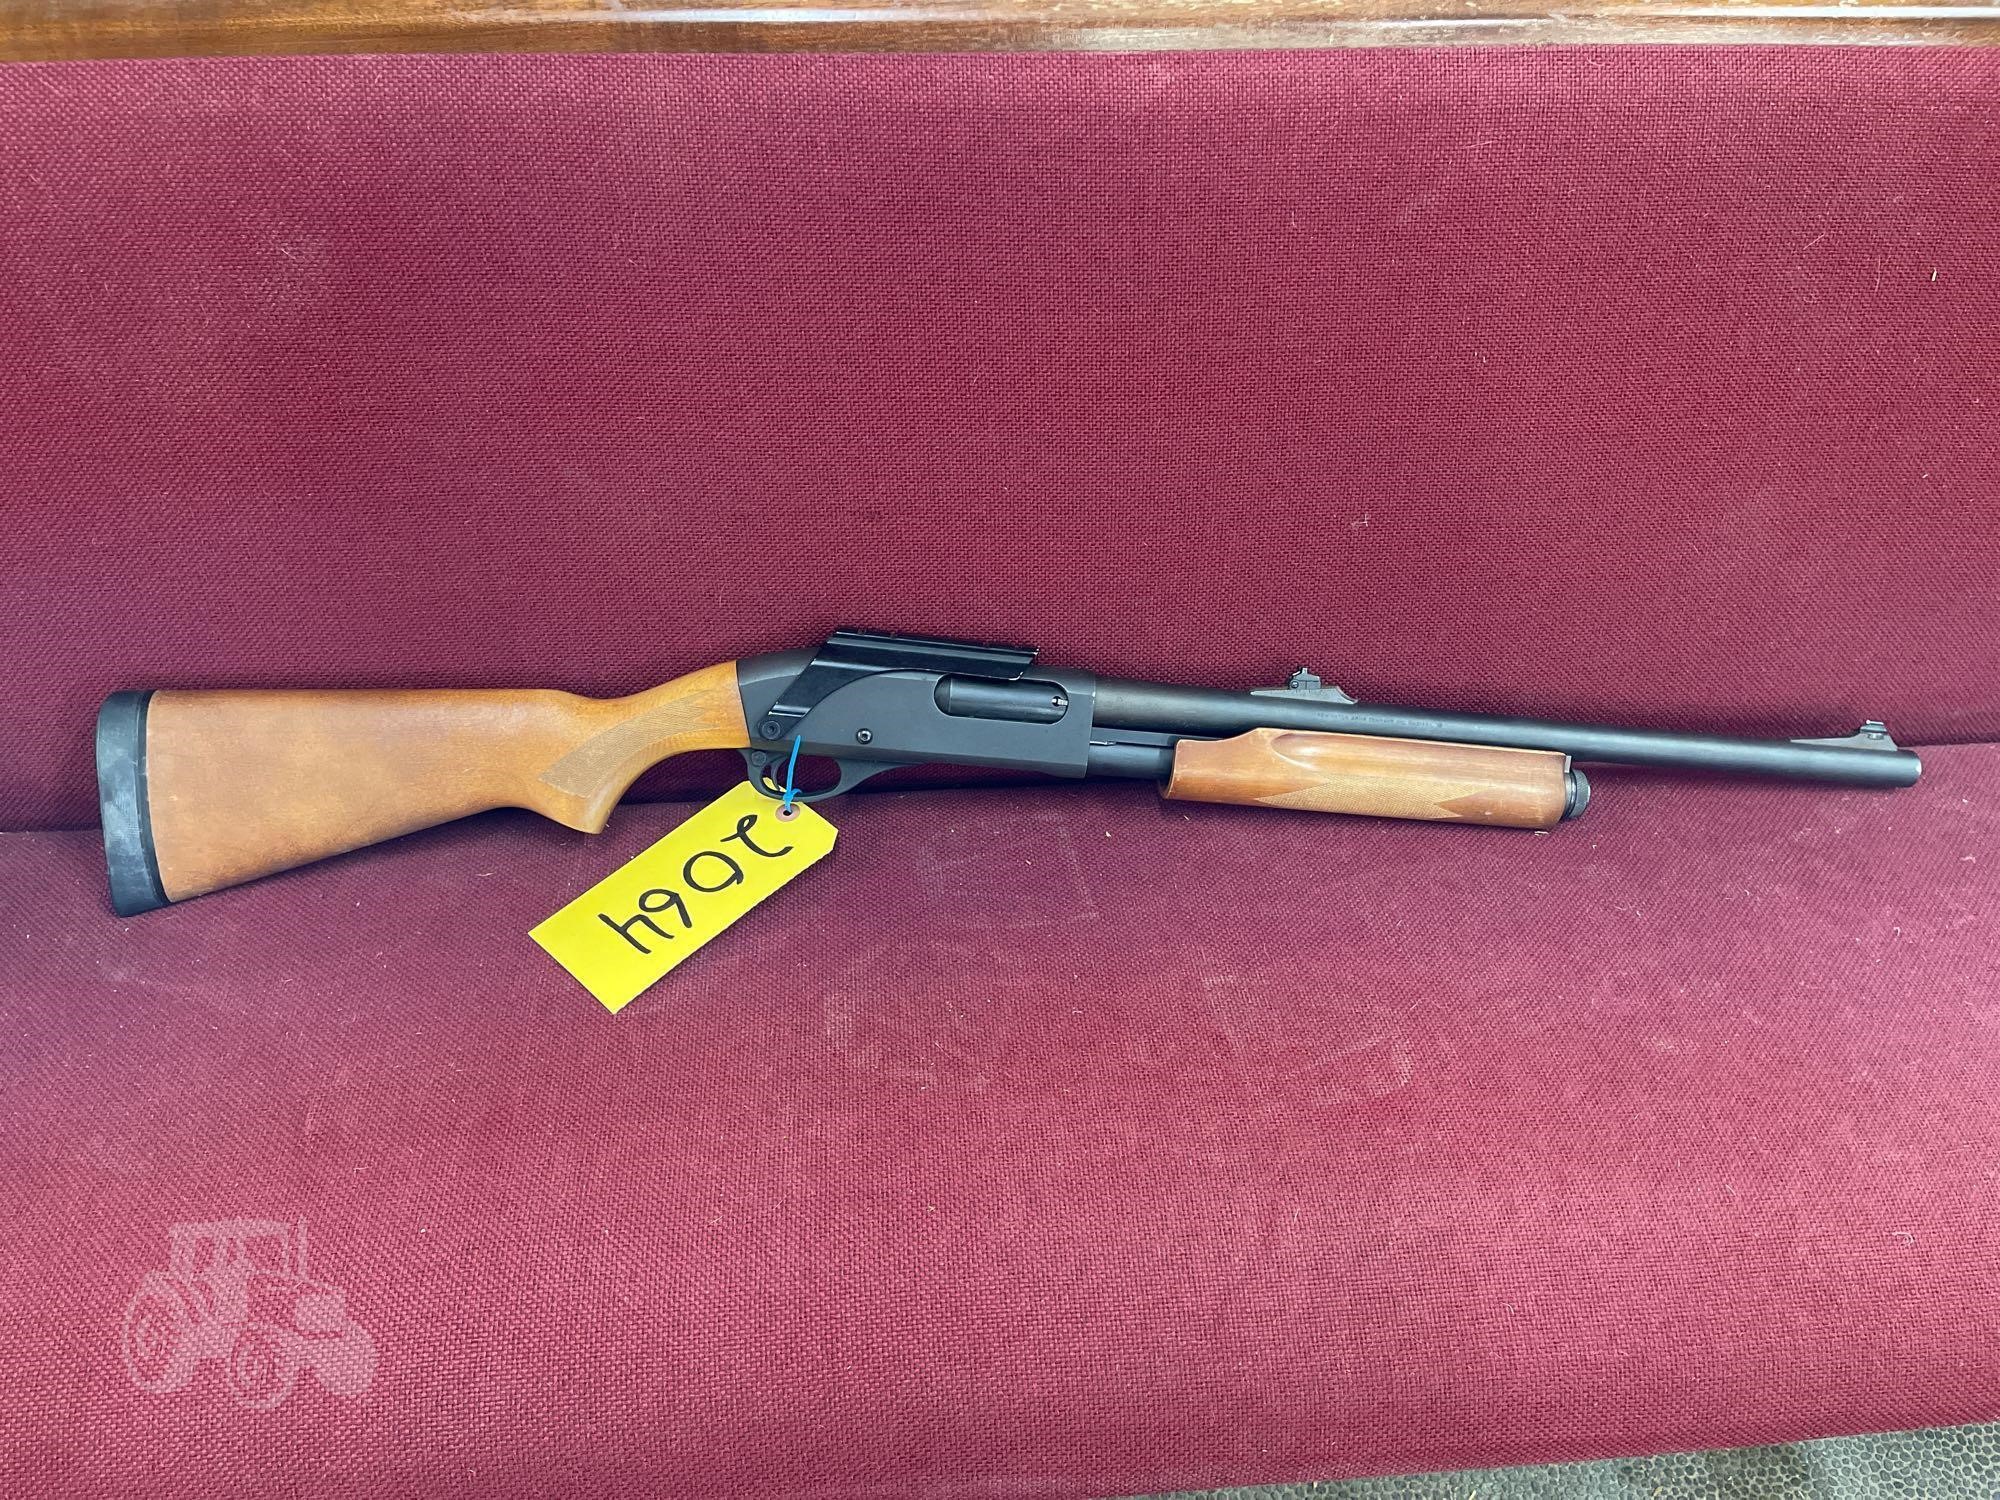 Remington 870 Express Magnum Other Items Auction Results 2 Listings Tractorhouse Com Page 1 Of 1